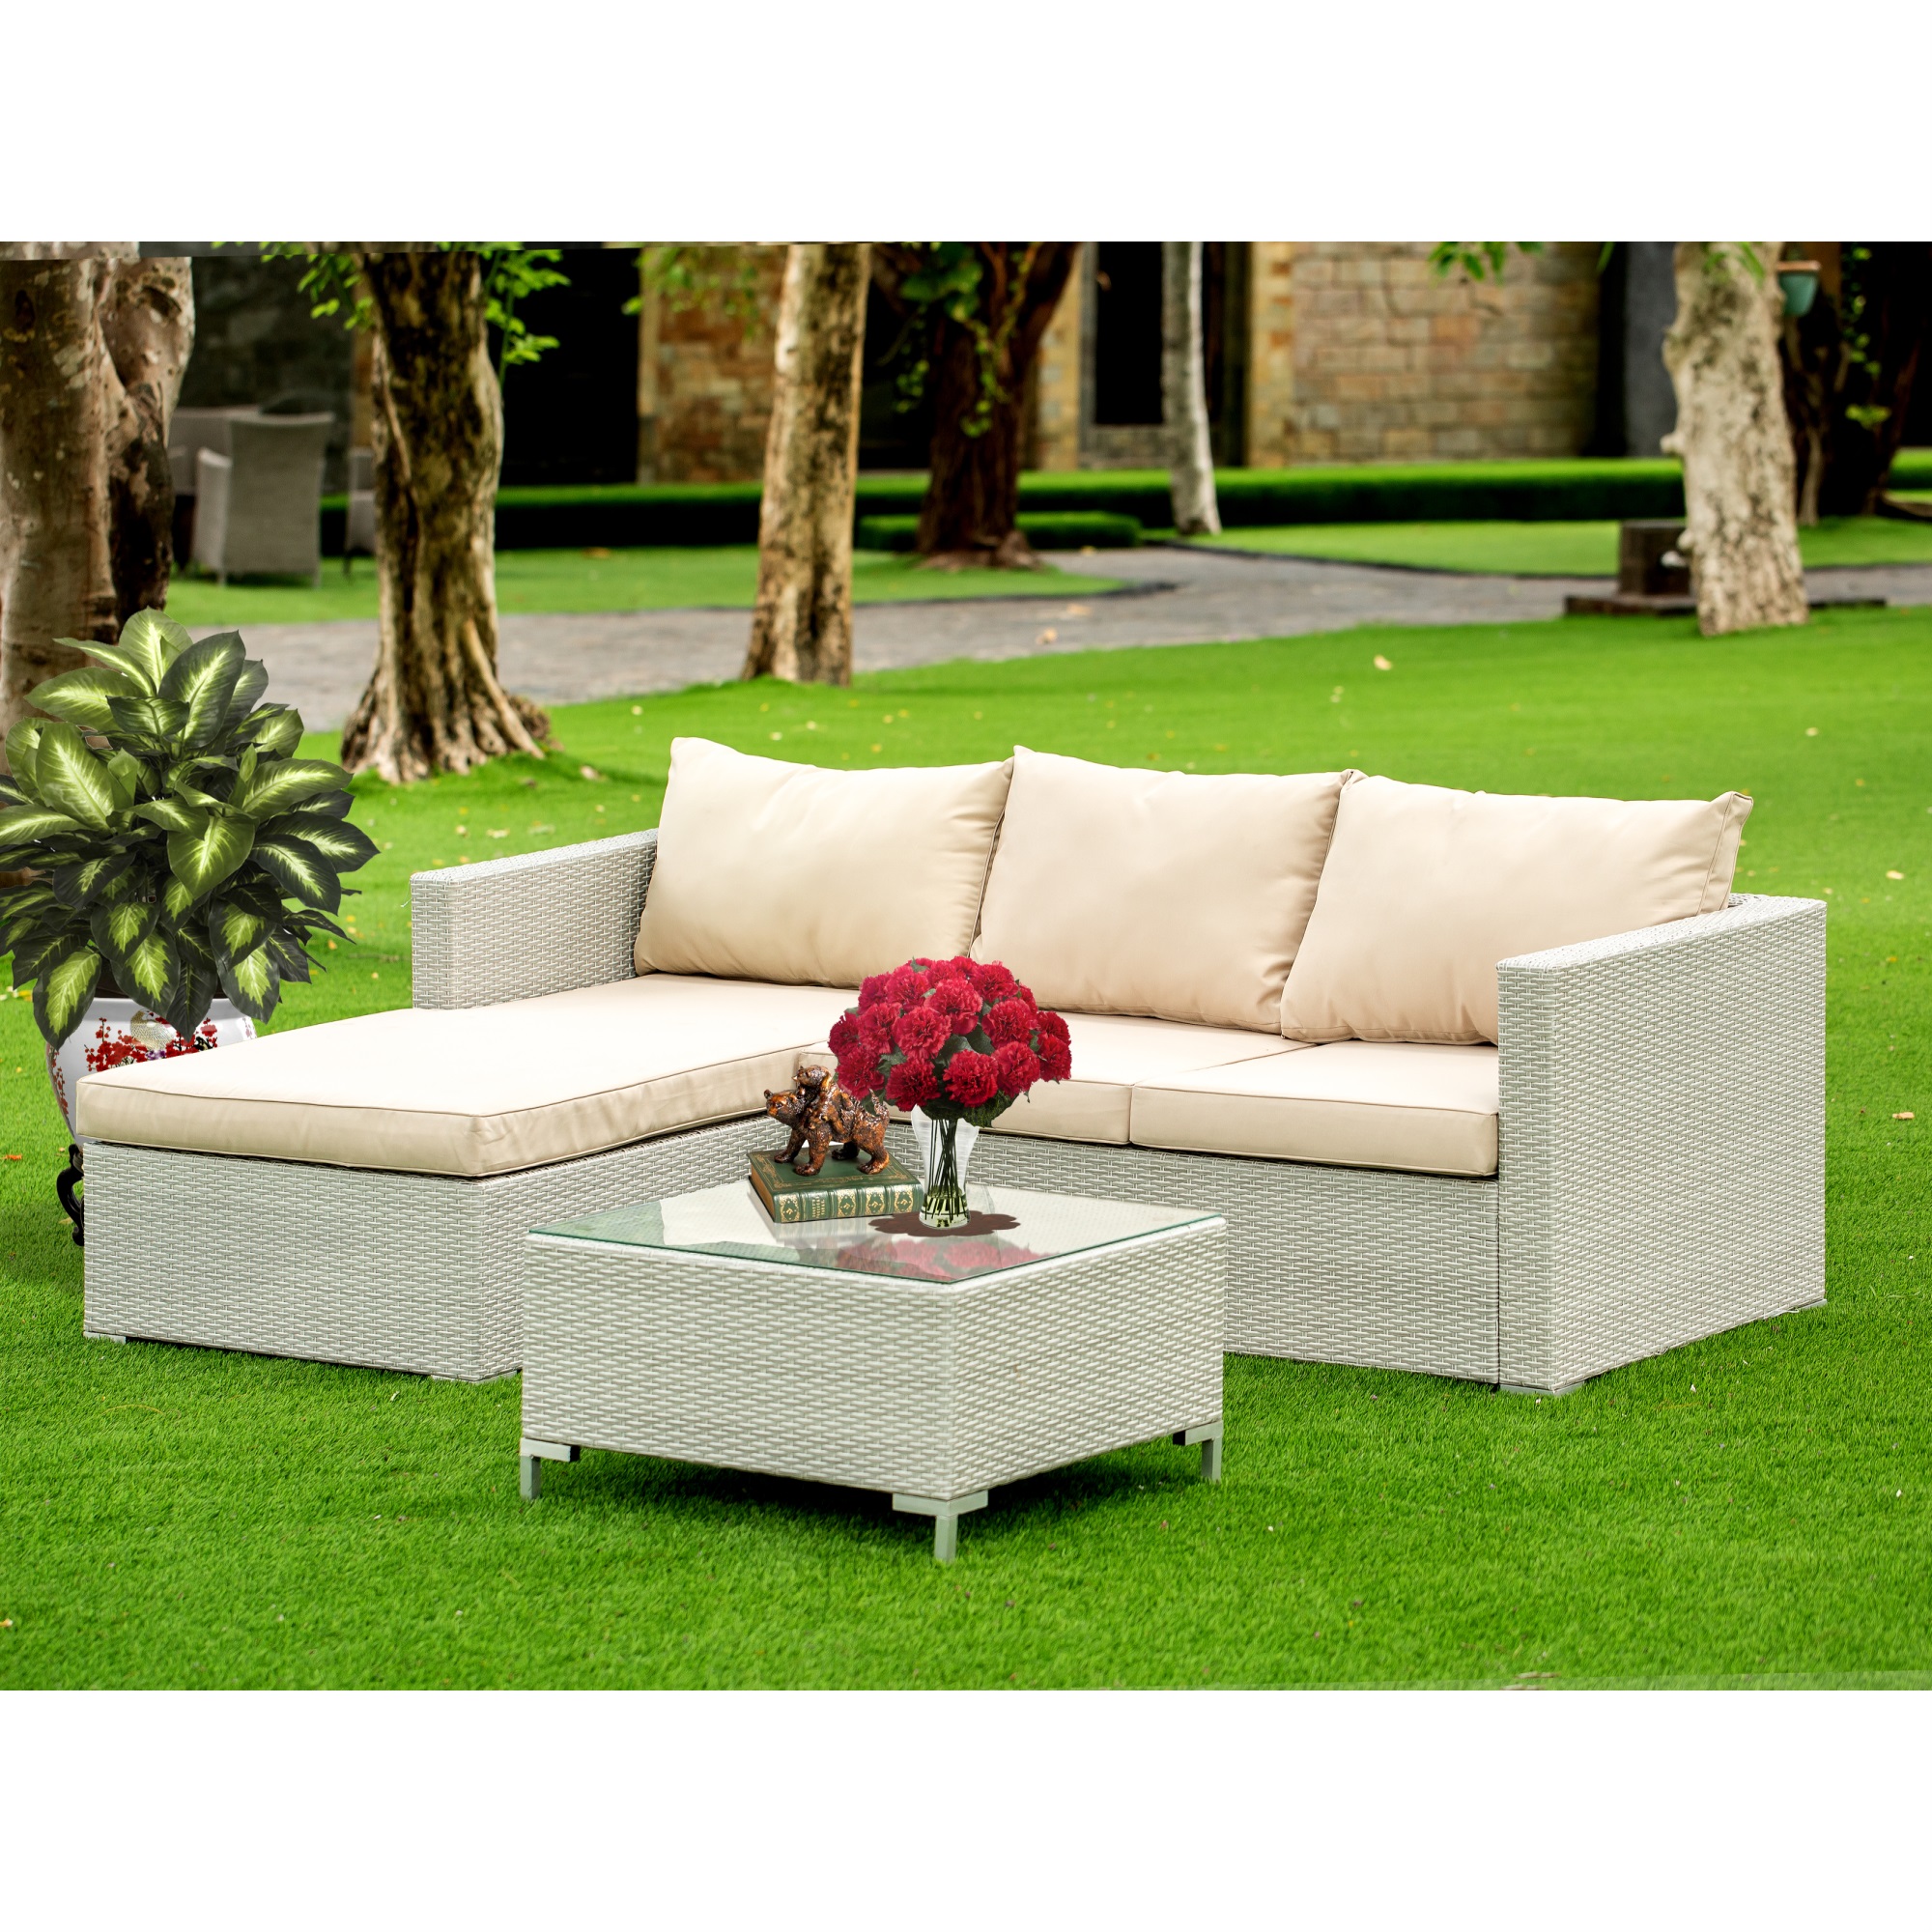 ACL3S03A 3Pc Natural Color Wicker Outdoor-Furniture Sectional Sofa Set Includes a Patio Table and Linen Fabric Cushion, Medium - image 1 of 2